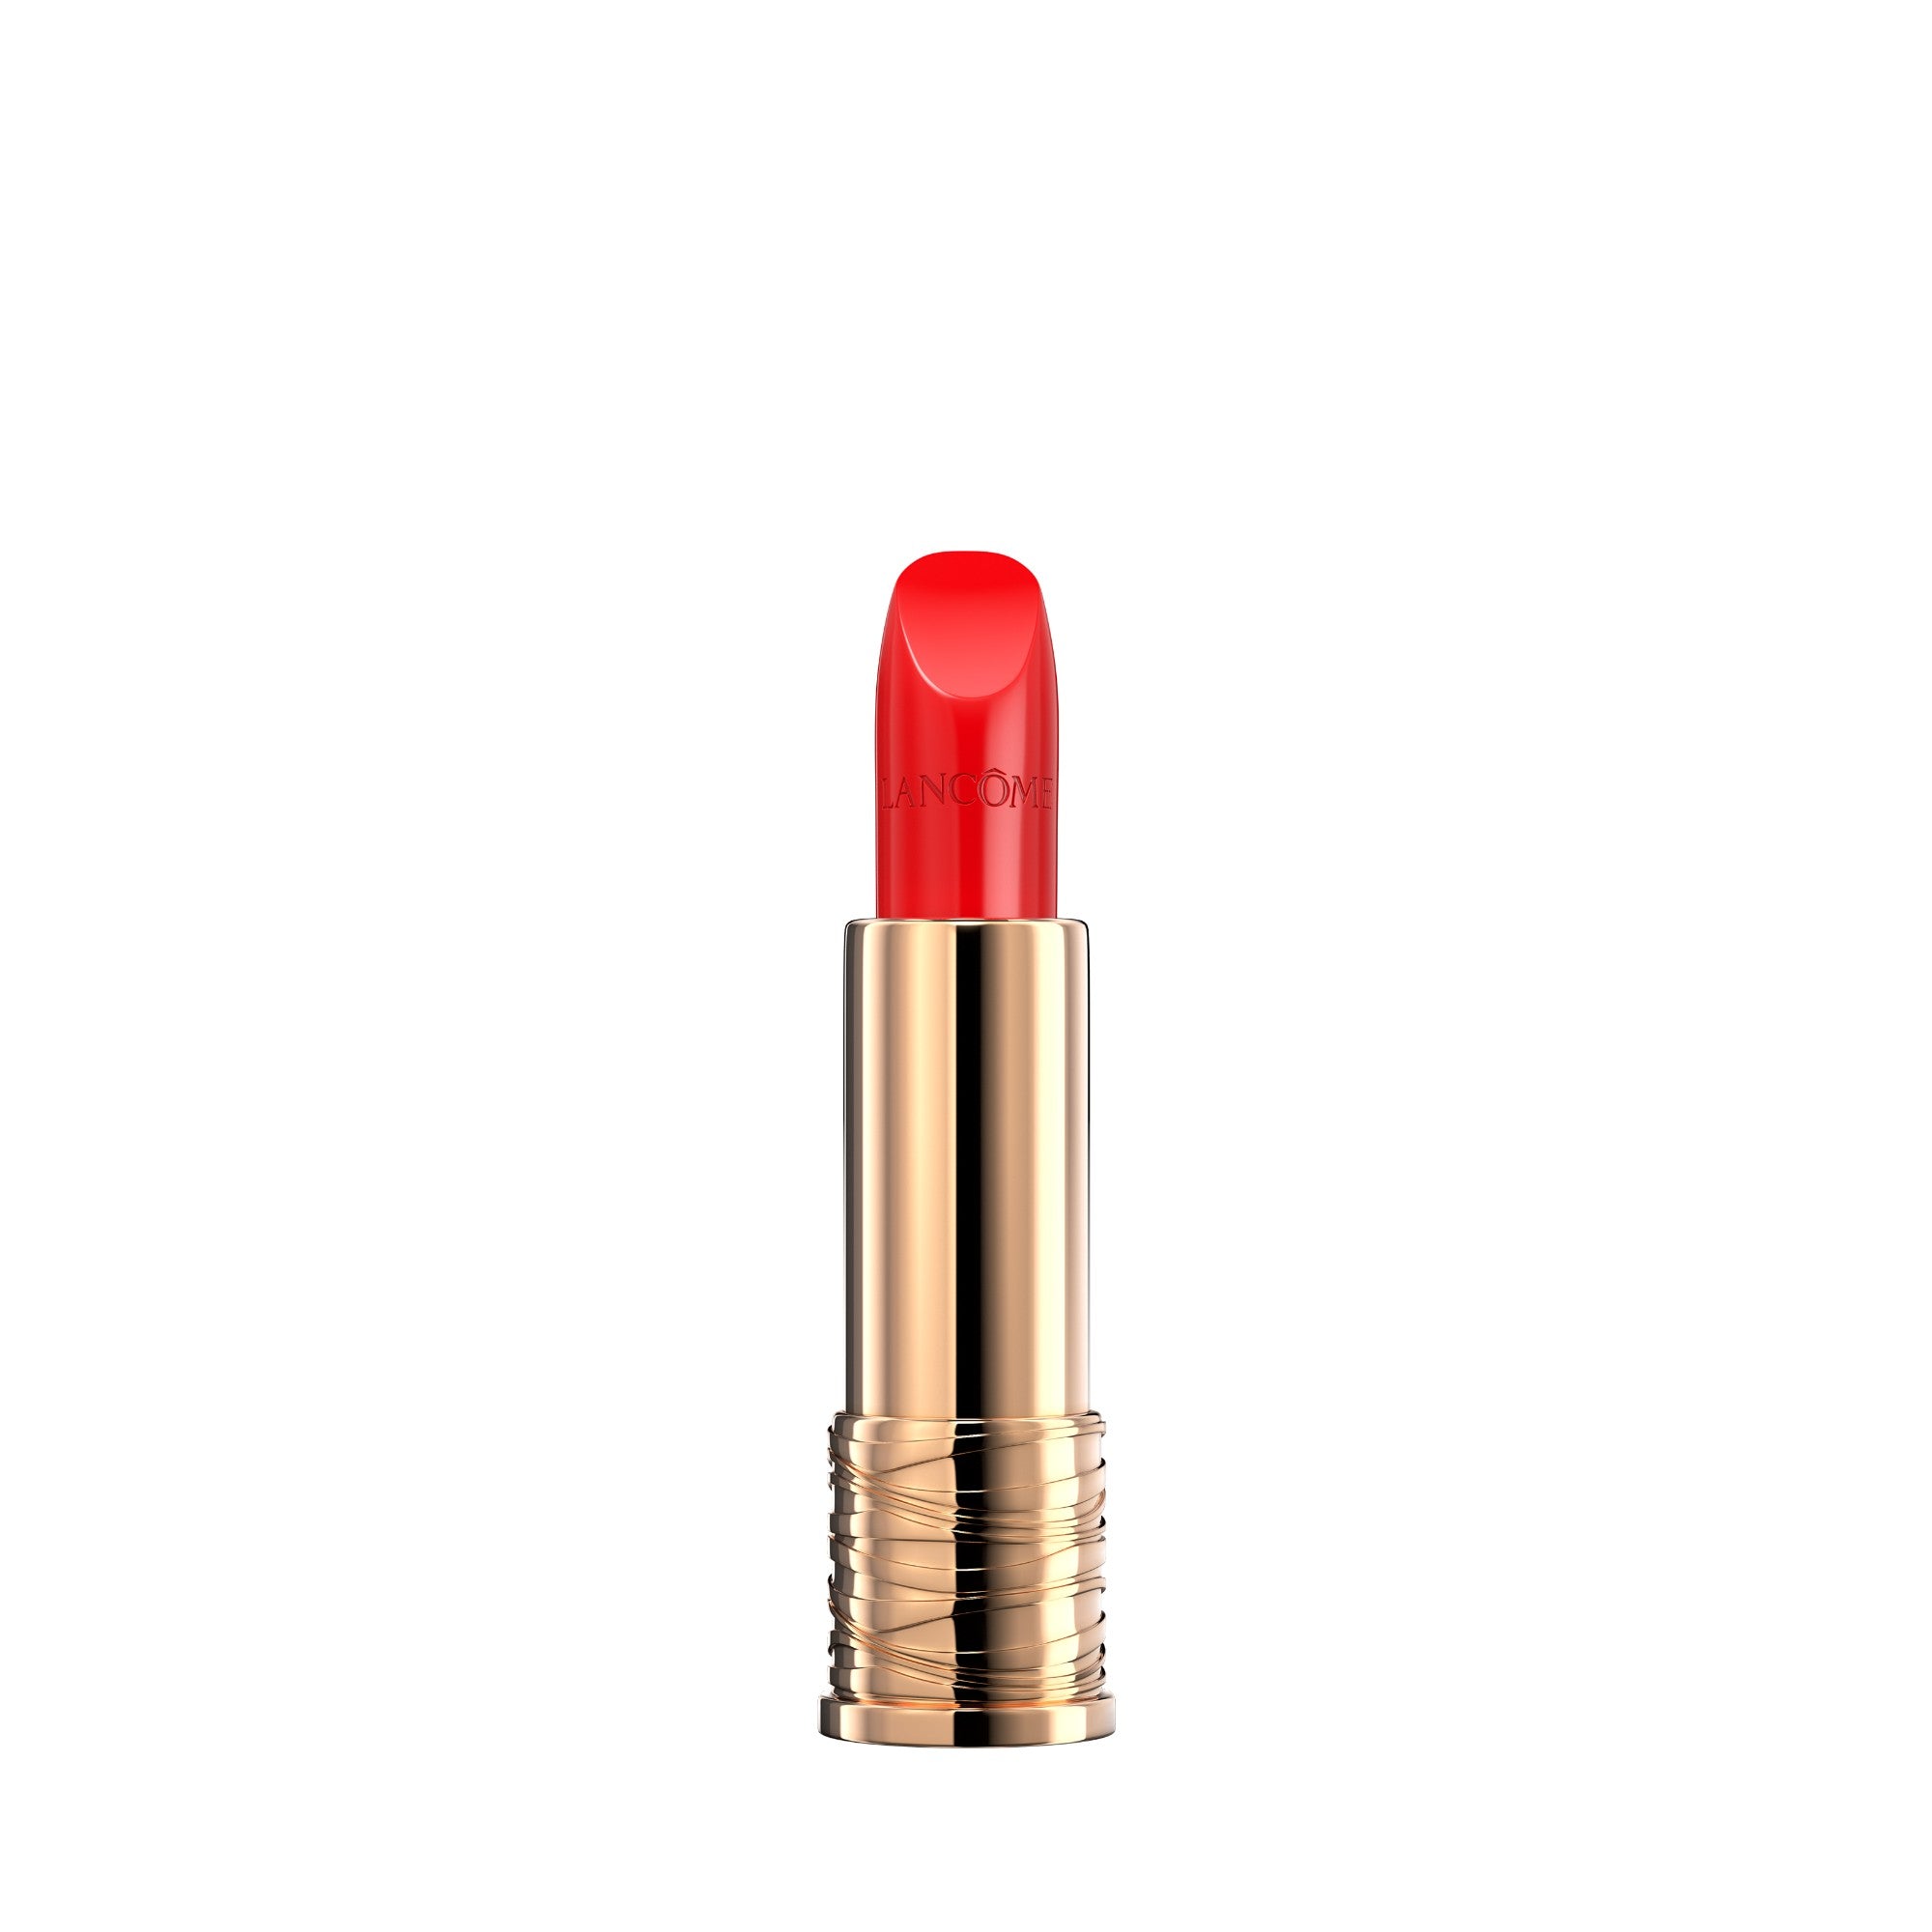 Lancome Absolu Rouge Cream Lipstick Caprice De Rouge Only